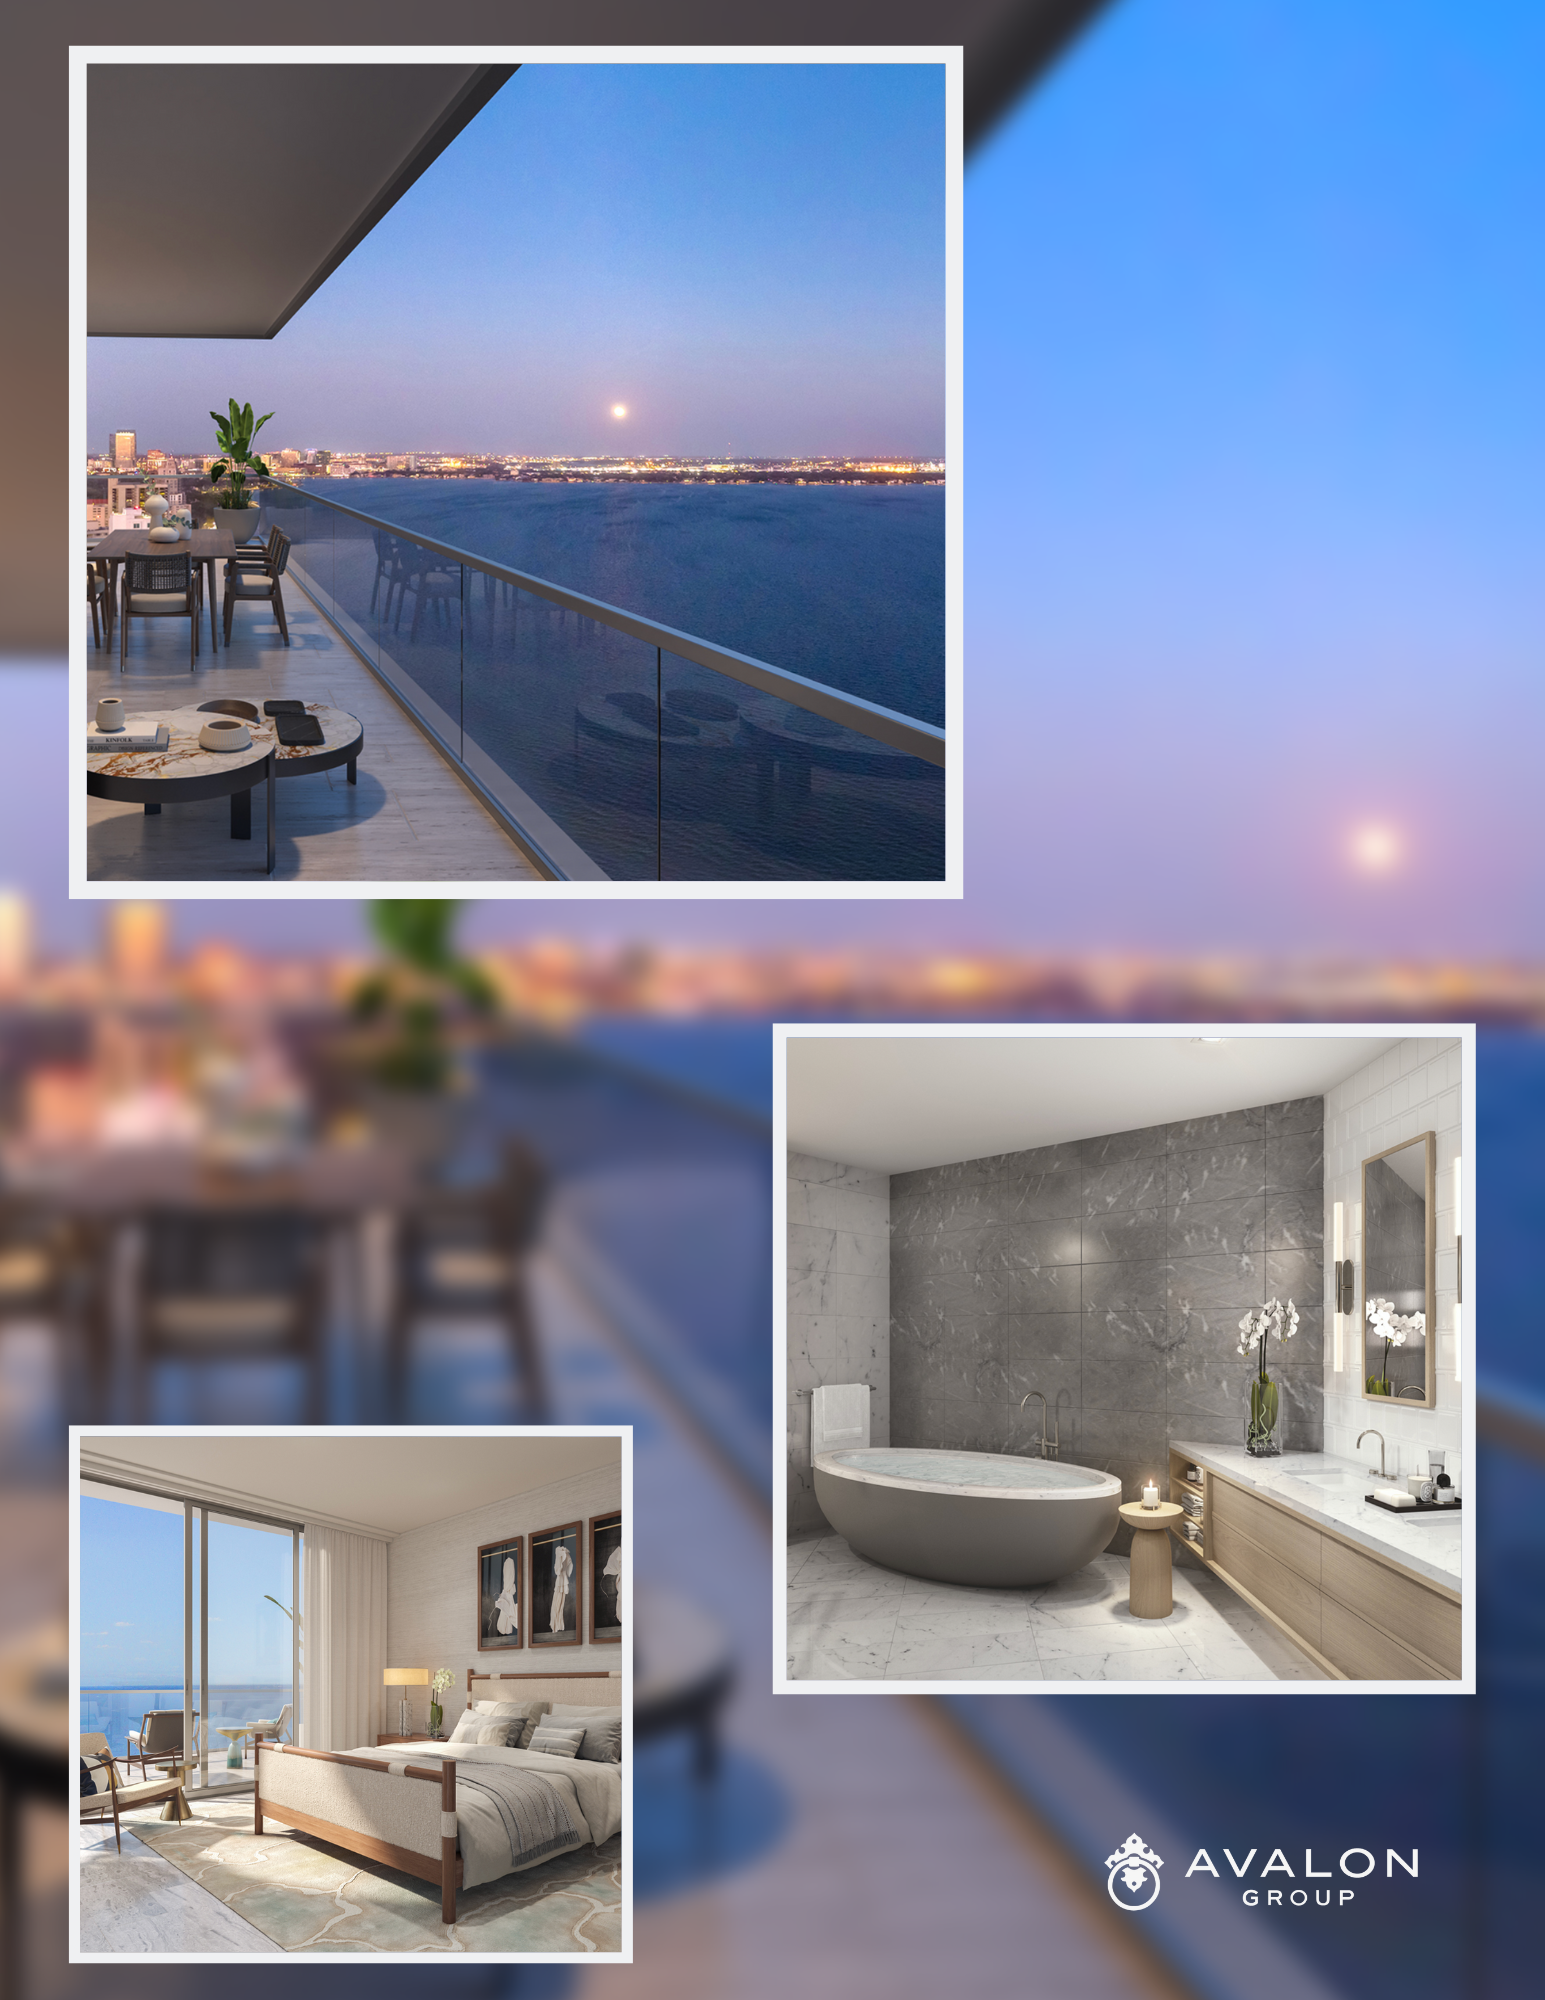 Tampa Ritz Carlton Condos For Sale picture shows Top to bottom:  Balcony over looking Tampa Bay, Spa Bathroom, and Bedrooms with views.